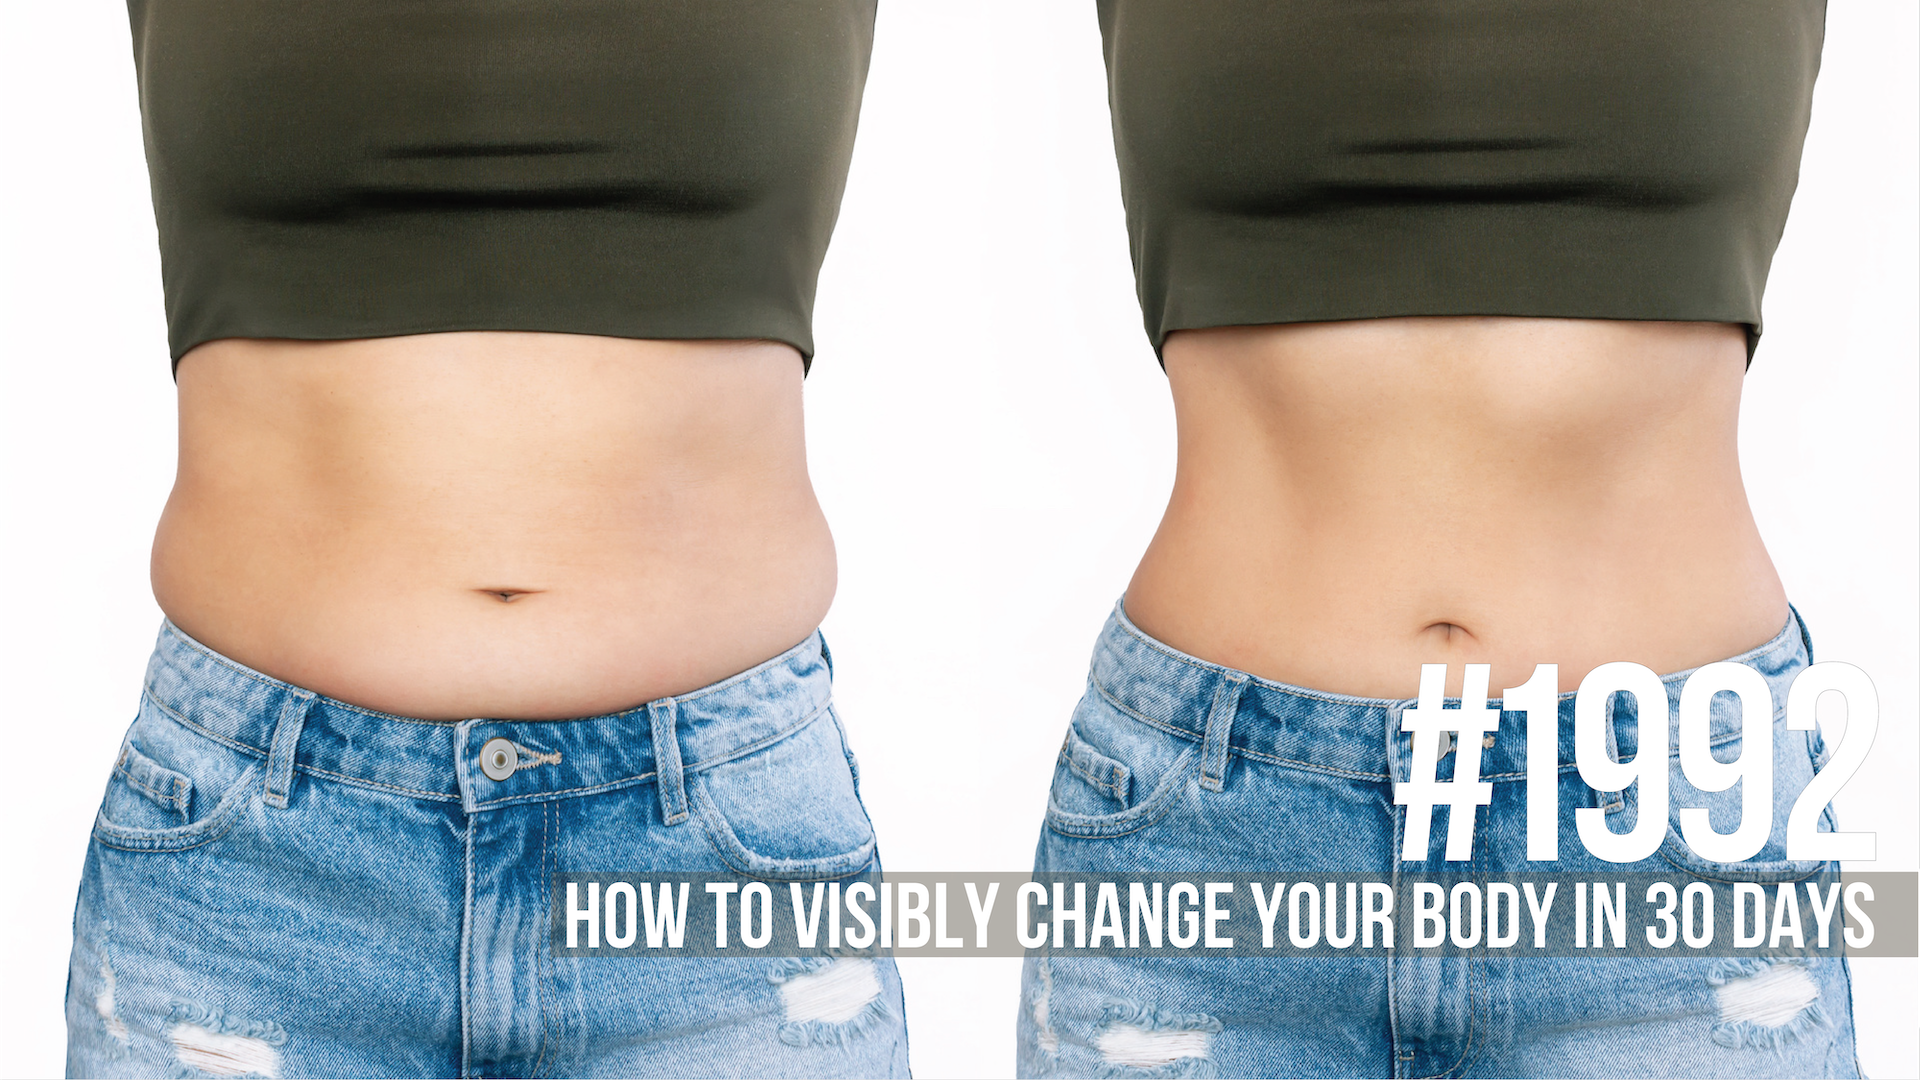 1992: How to Visibly Change Your Body in 30 Days